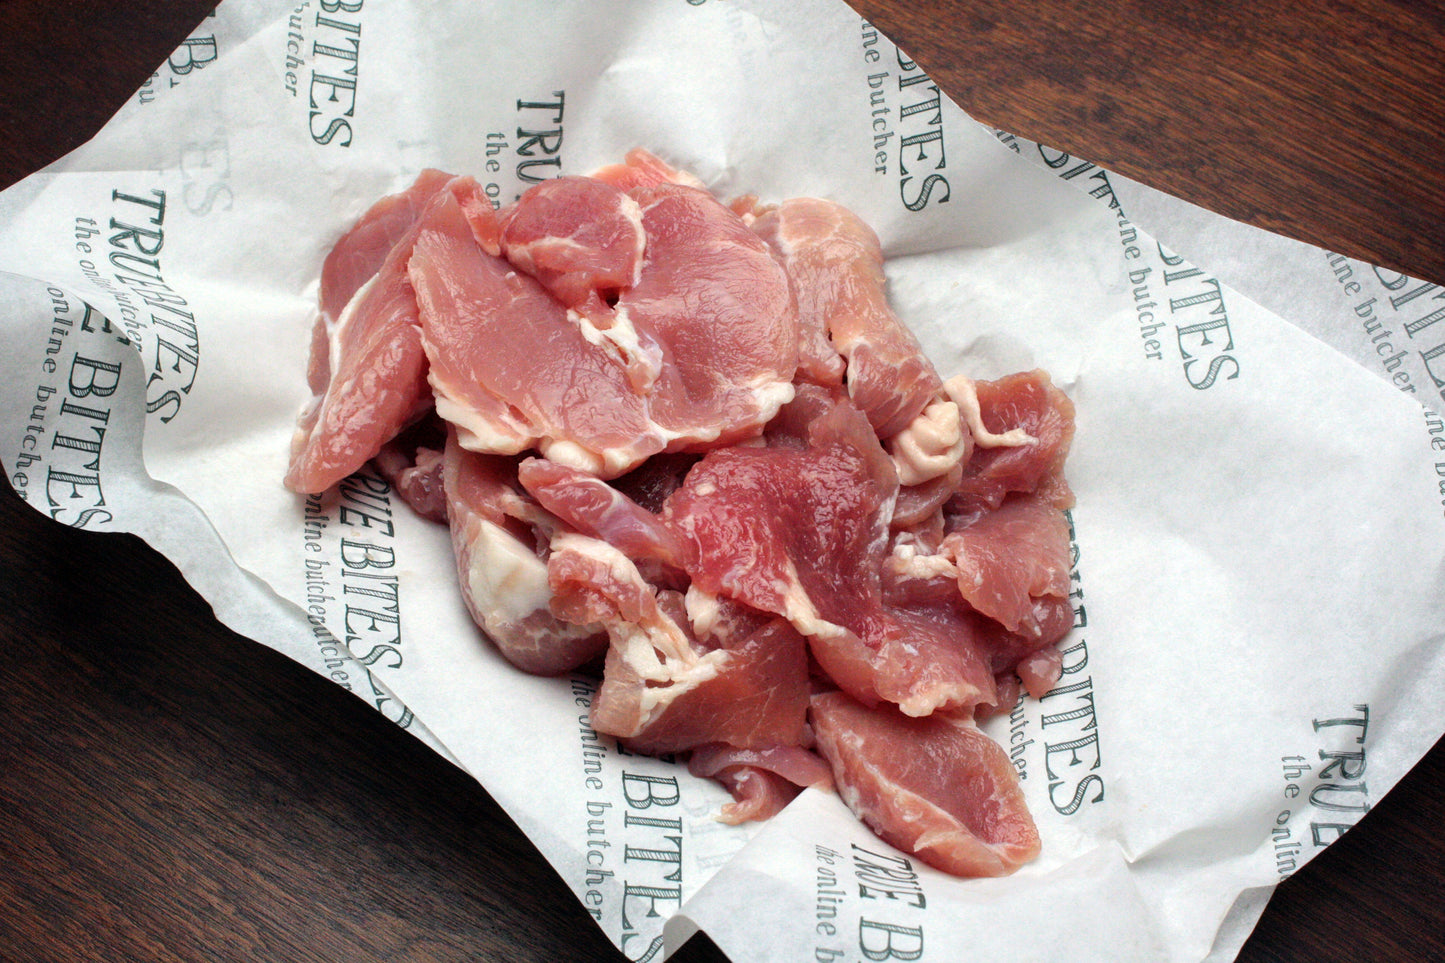 bacon misshapes displayed on branded true bites greaseproof paper